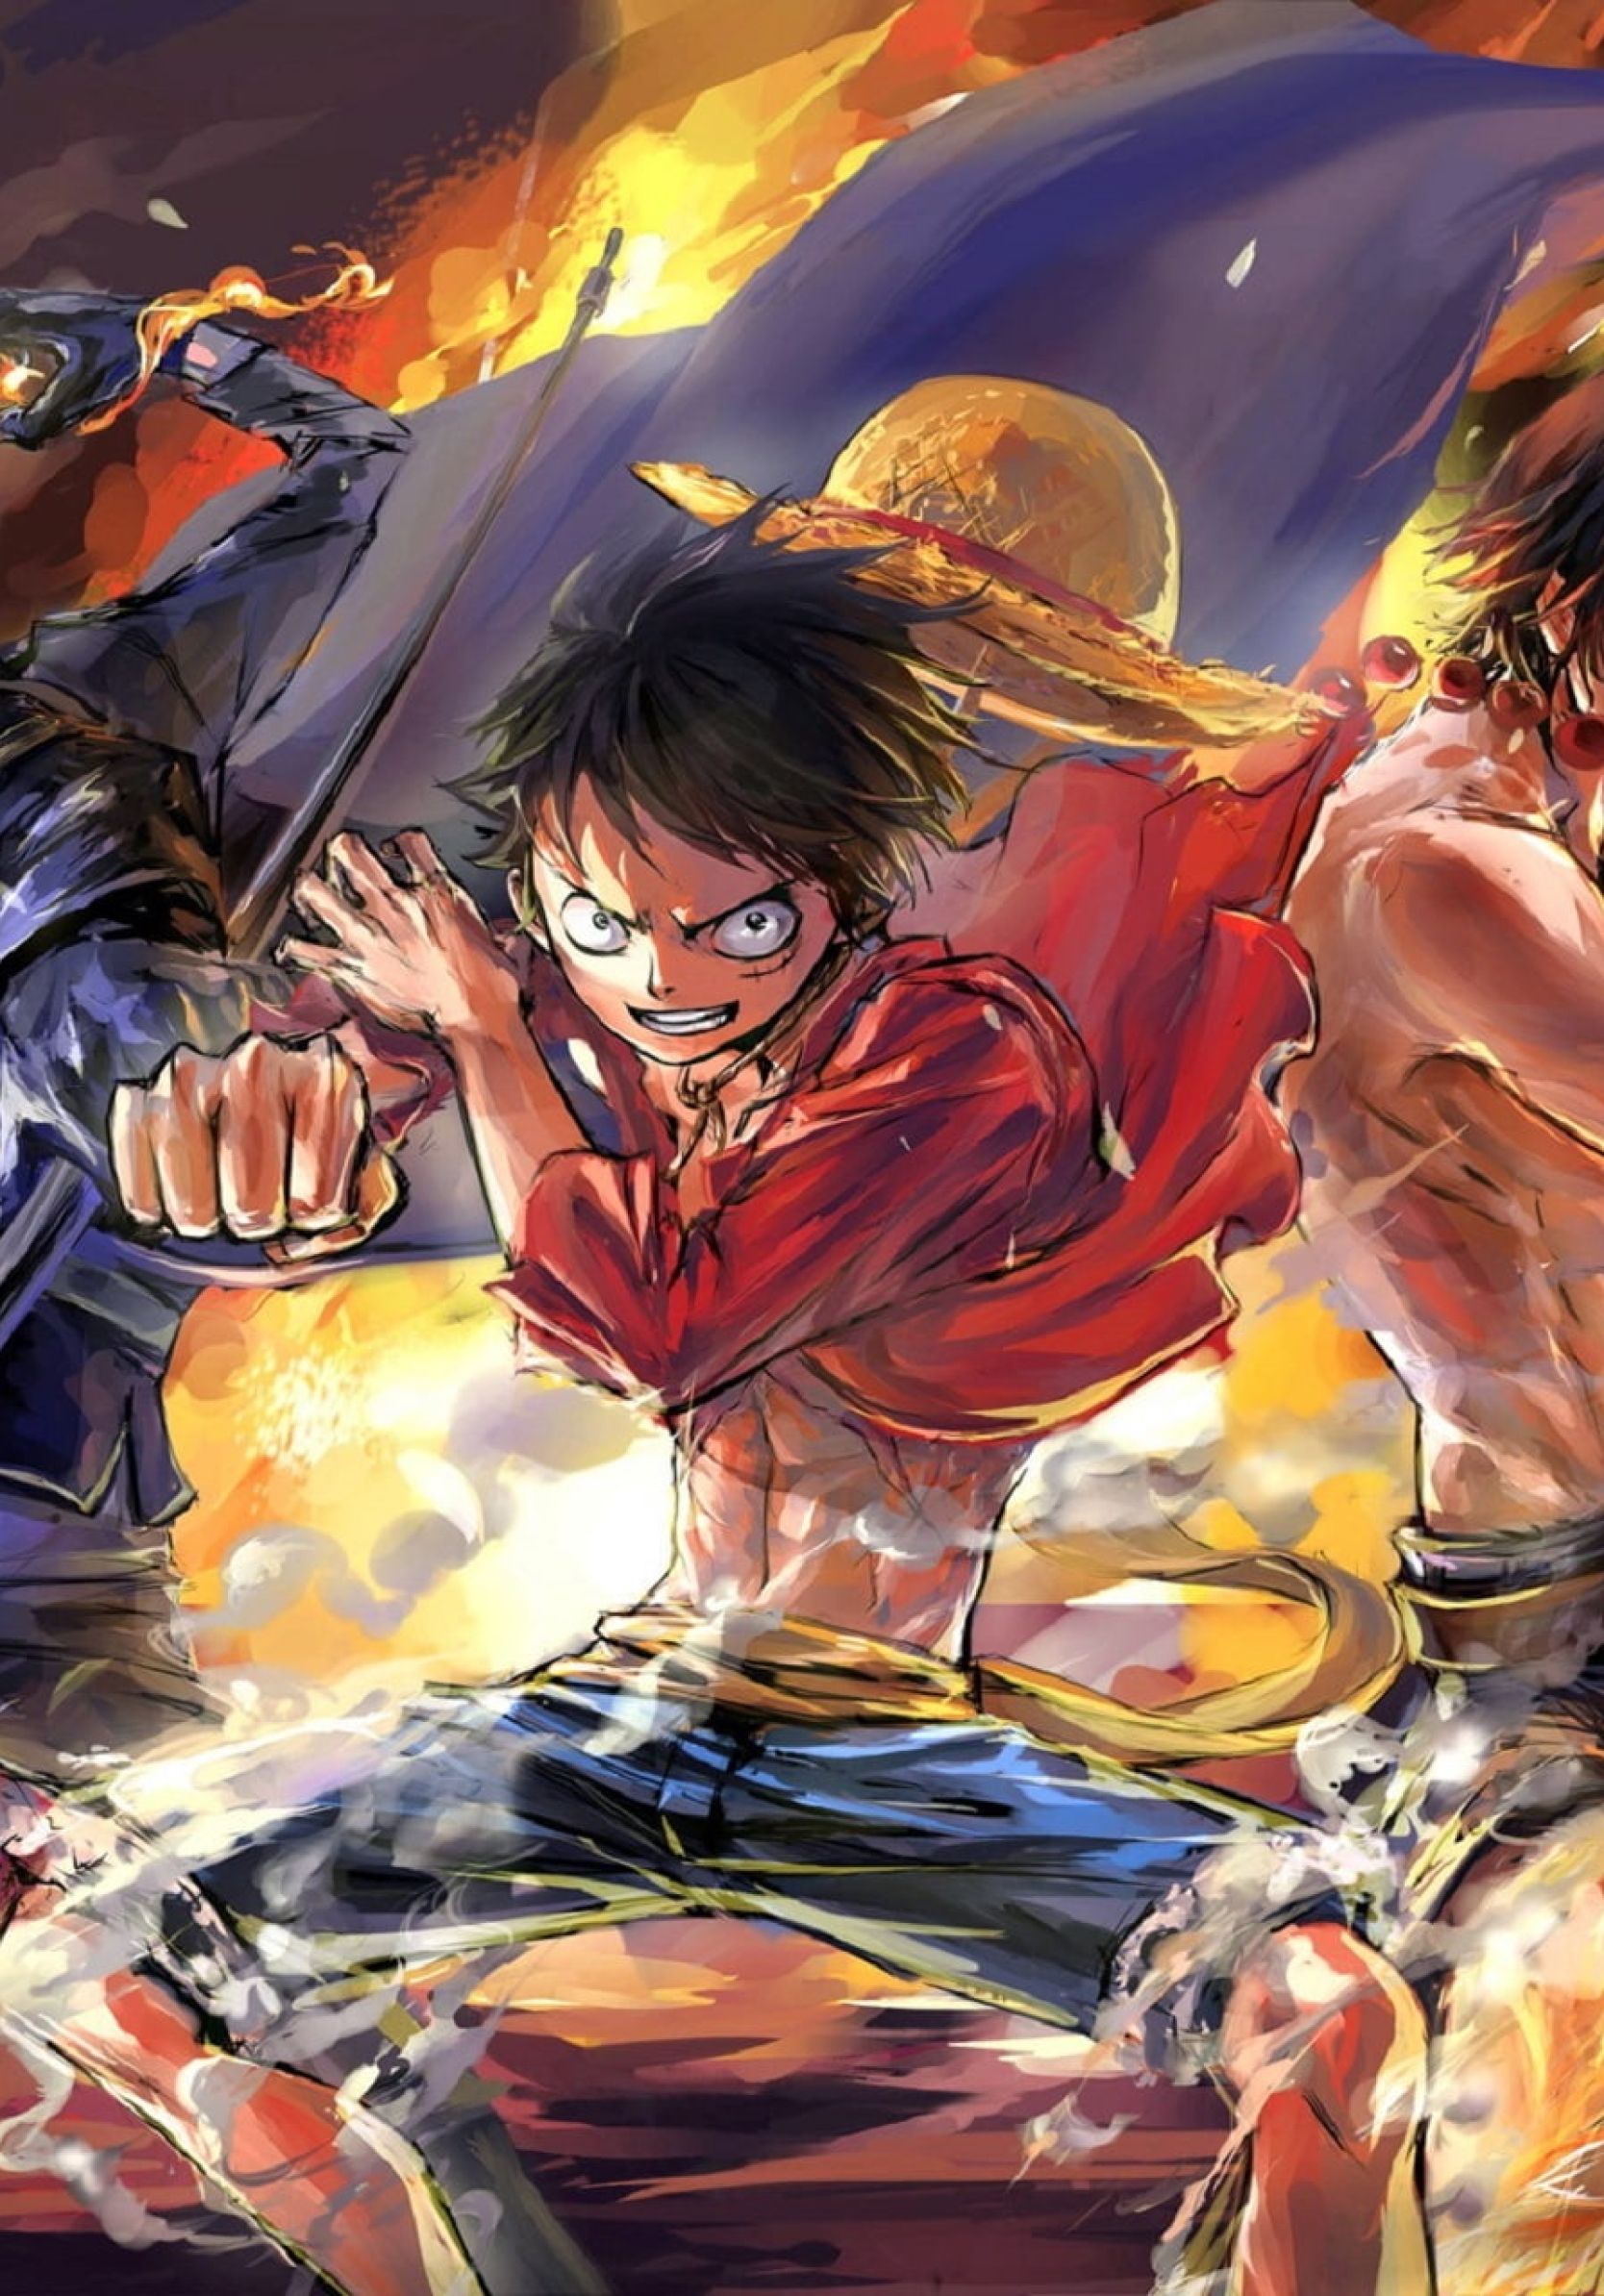 Luffy, Ace and Sabo One Piece Team 1668x2388 Resolution Wallpaper, HD Anime 4K Wallpaper, Image, Photo and Background